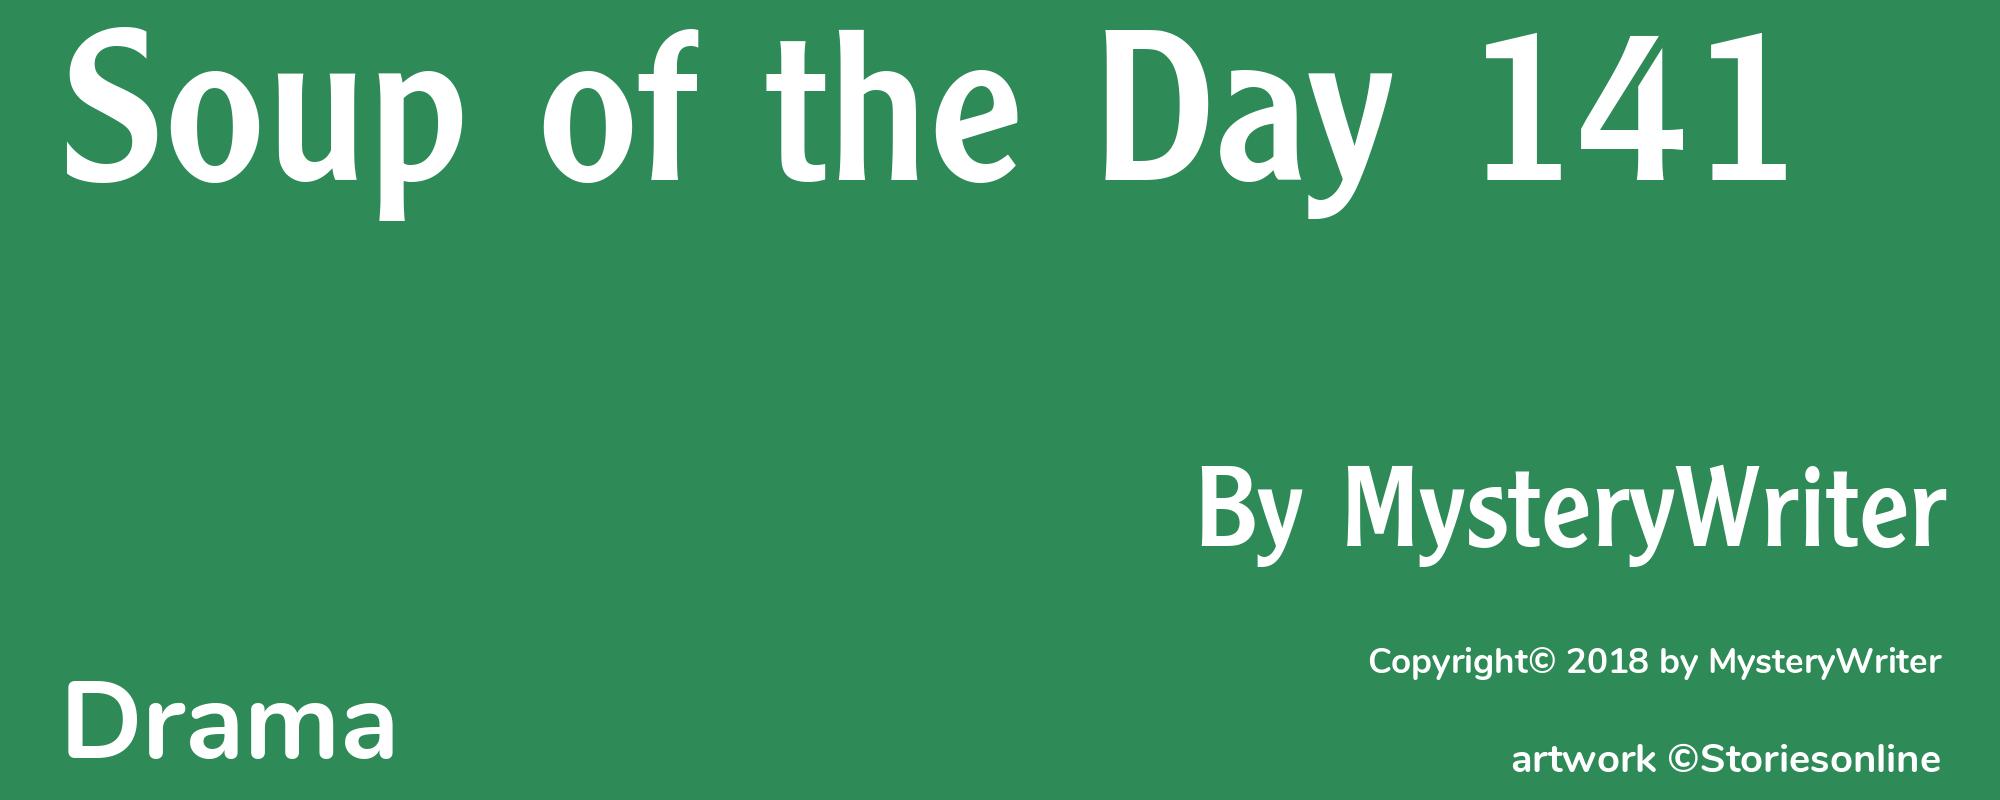 Soup of the Day 141 - Cover